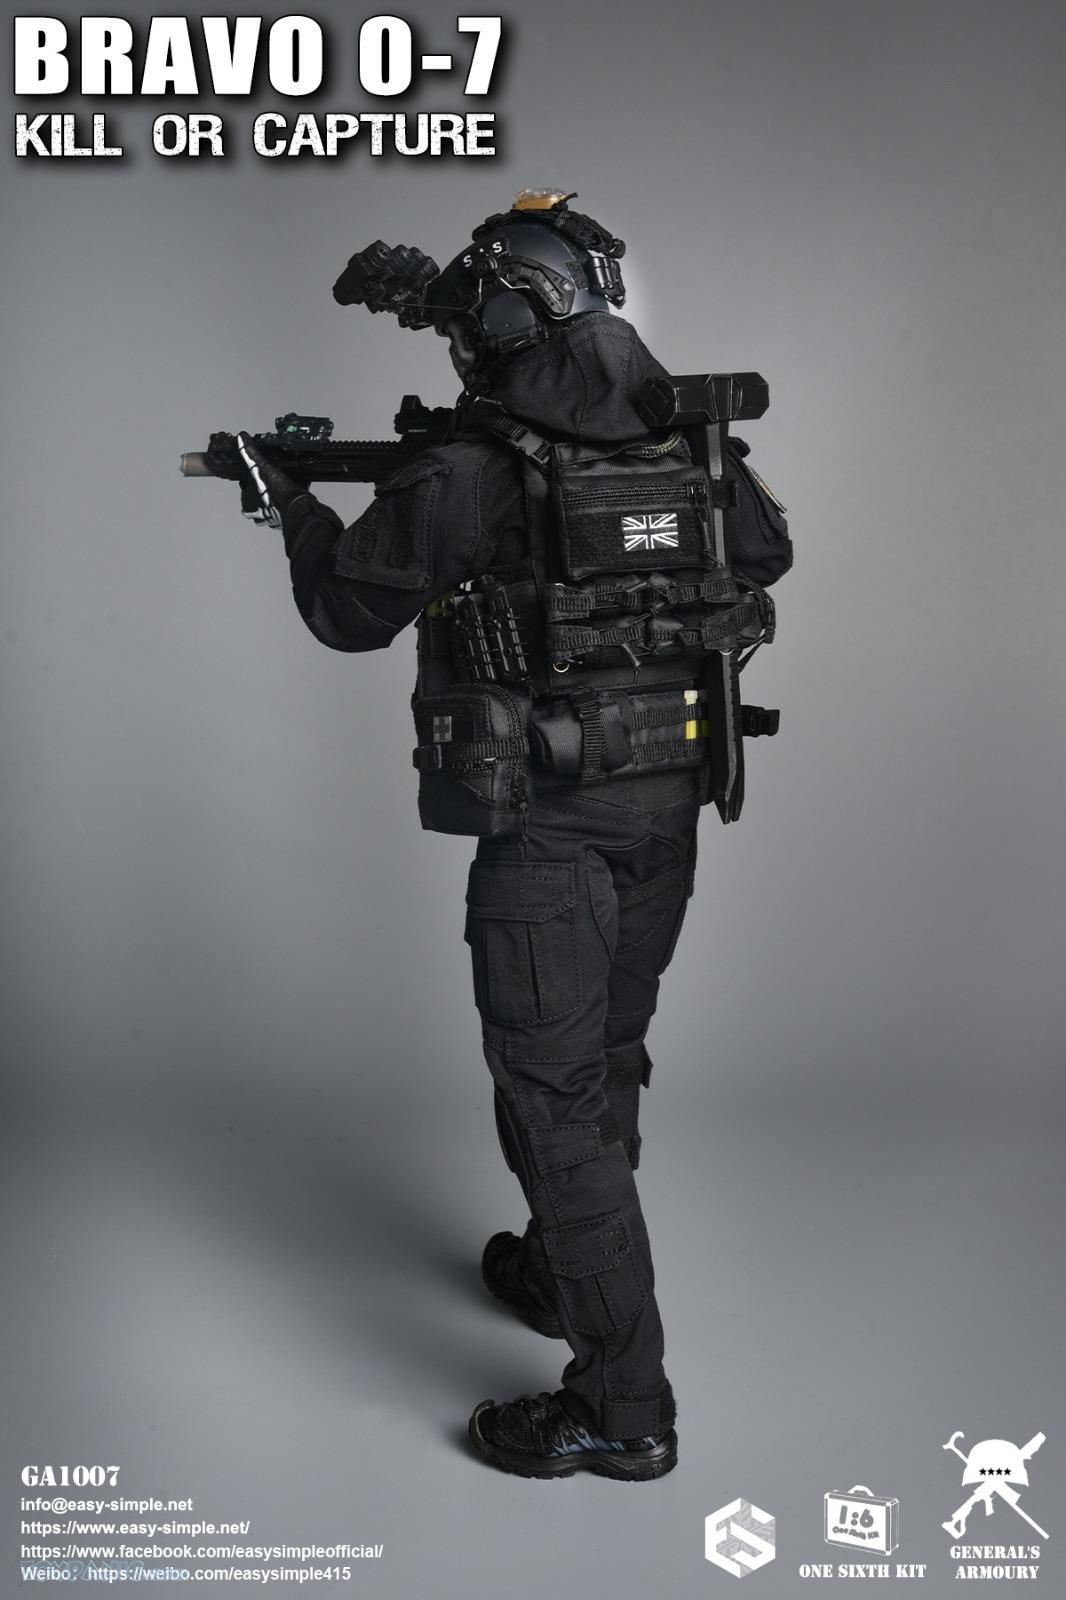 General&#39;s Armory - GA1007 - Bravo 0-7 Kill or Capture (1/6 Scale) - Marvelous Toys